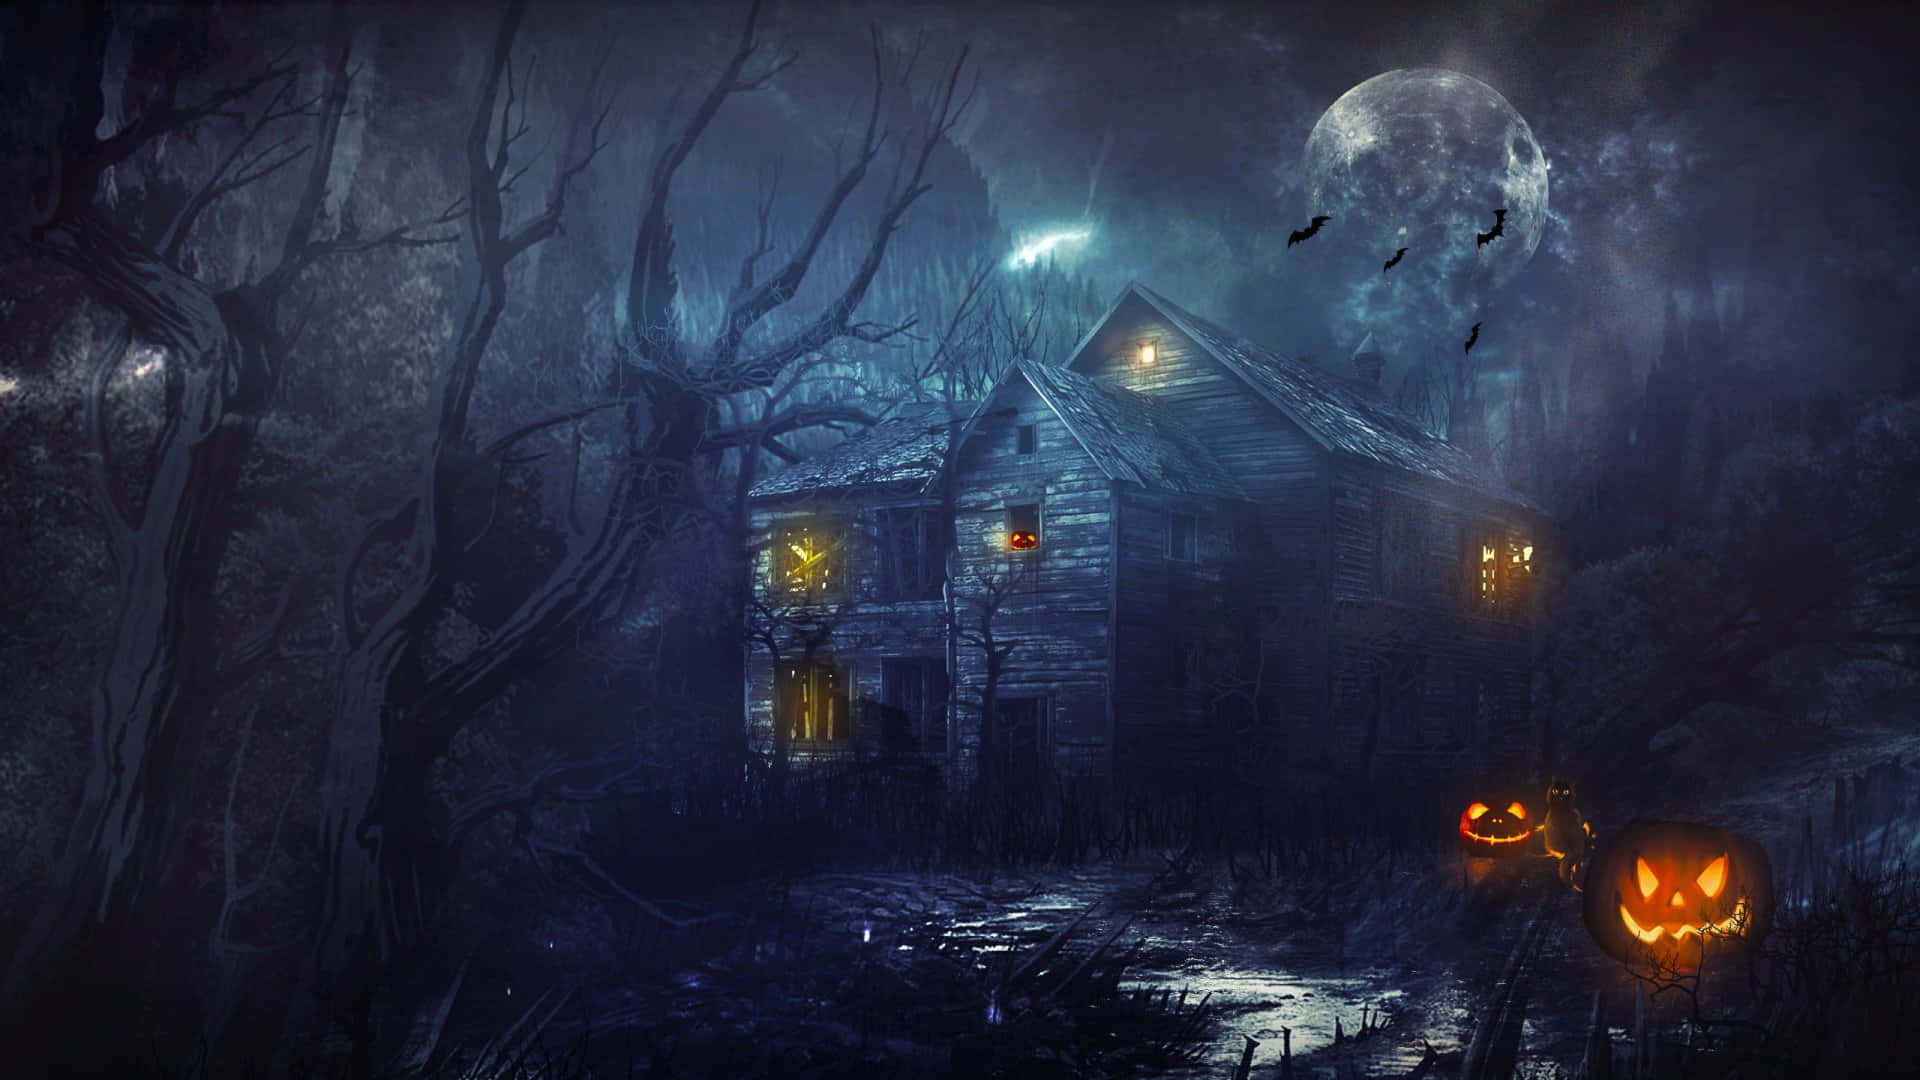 Enter the spine-chilling world of a haunted house.